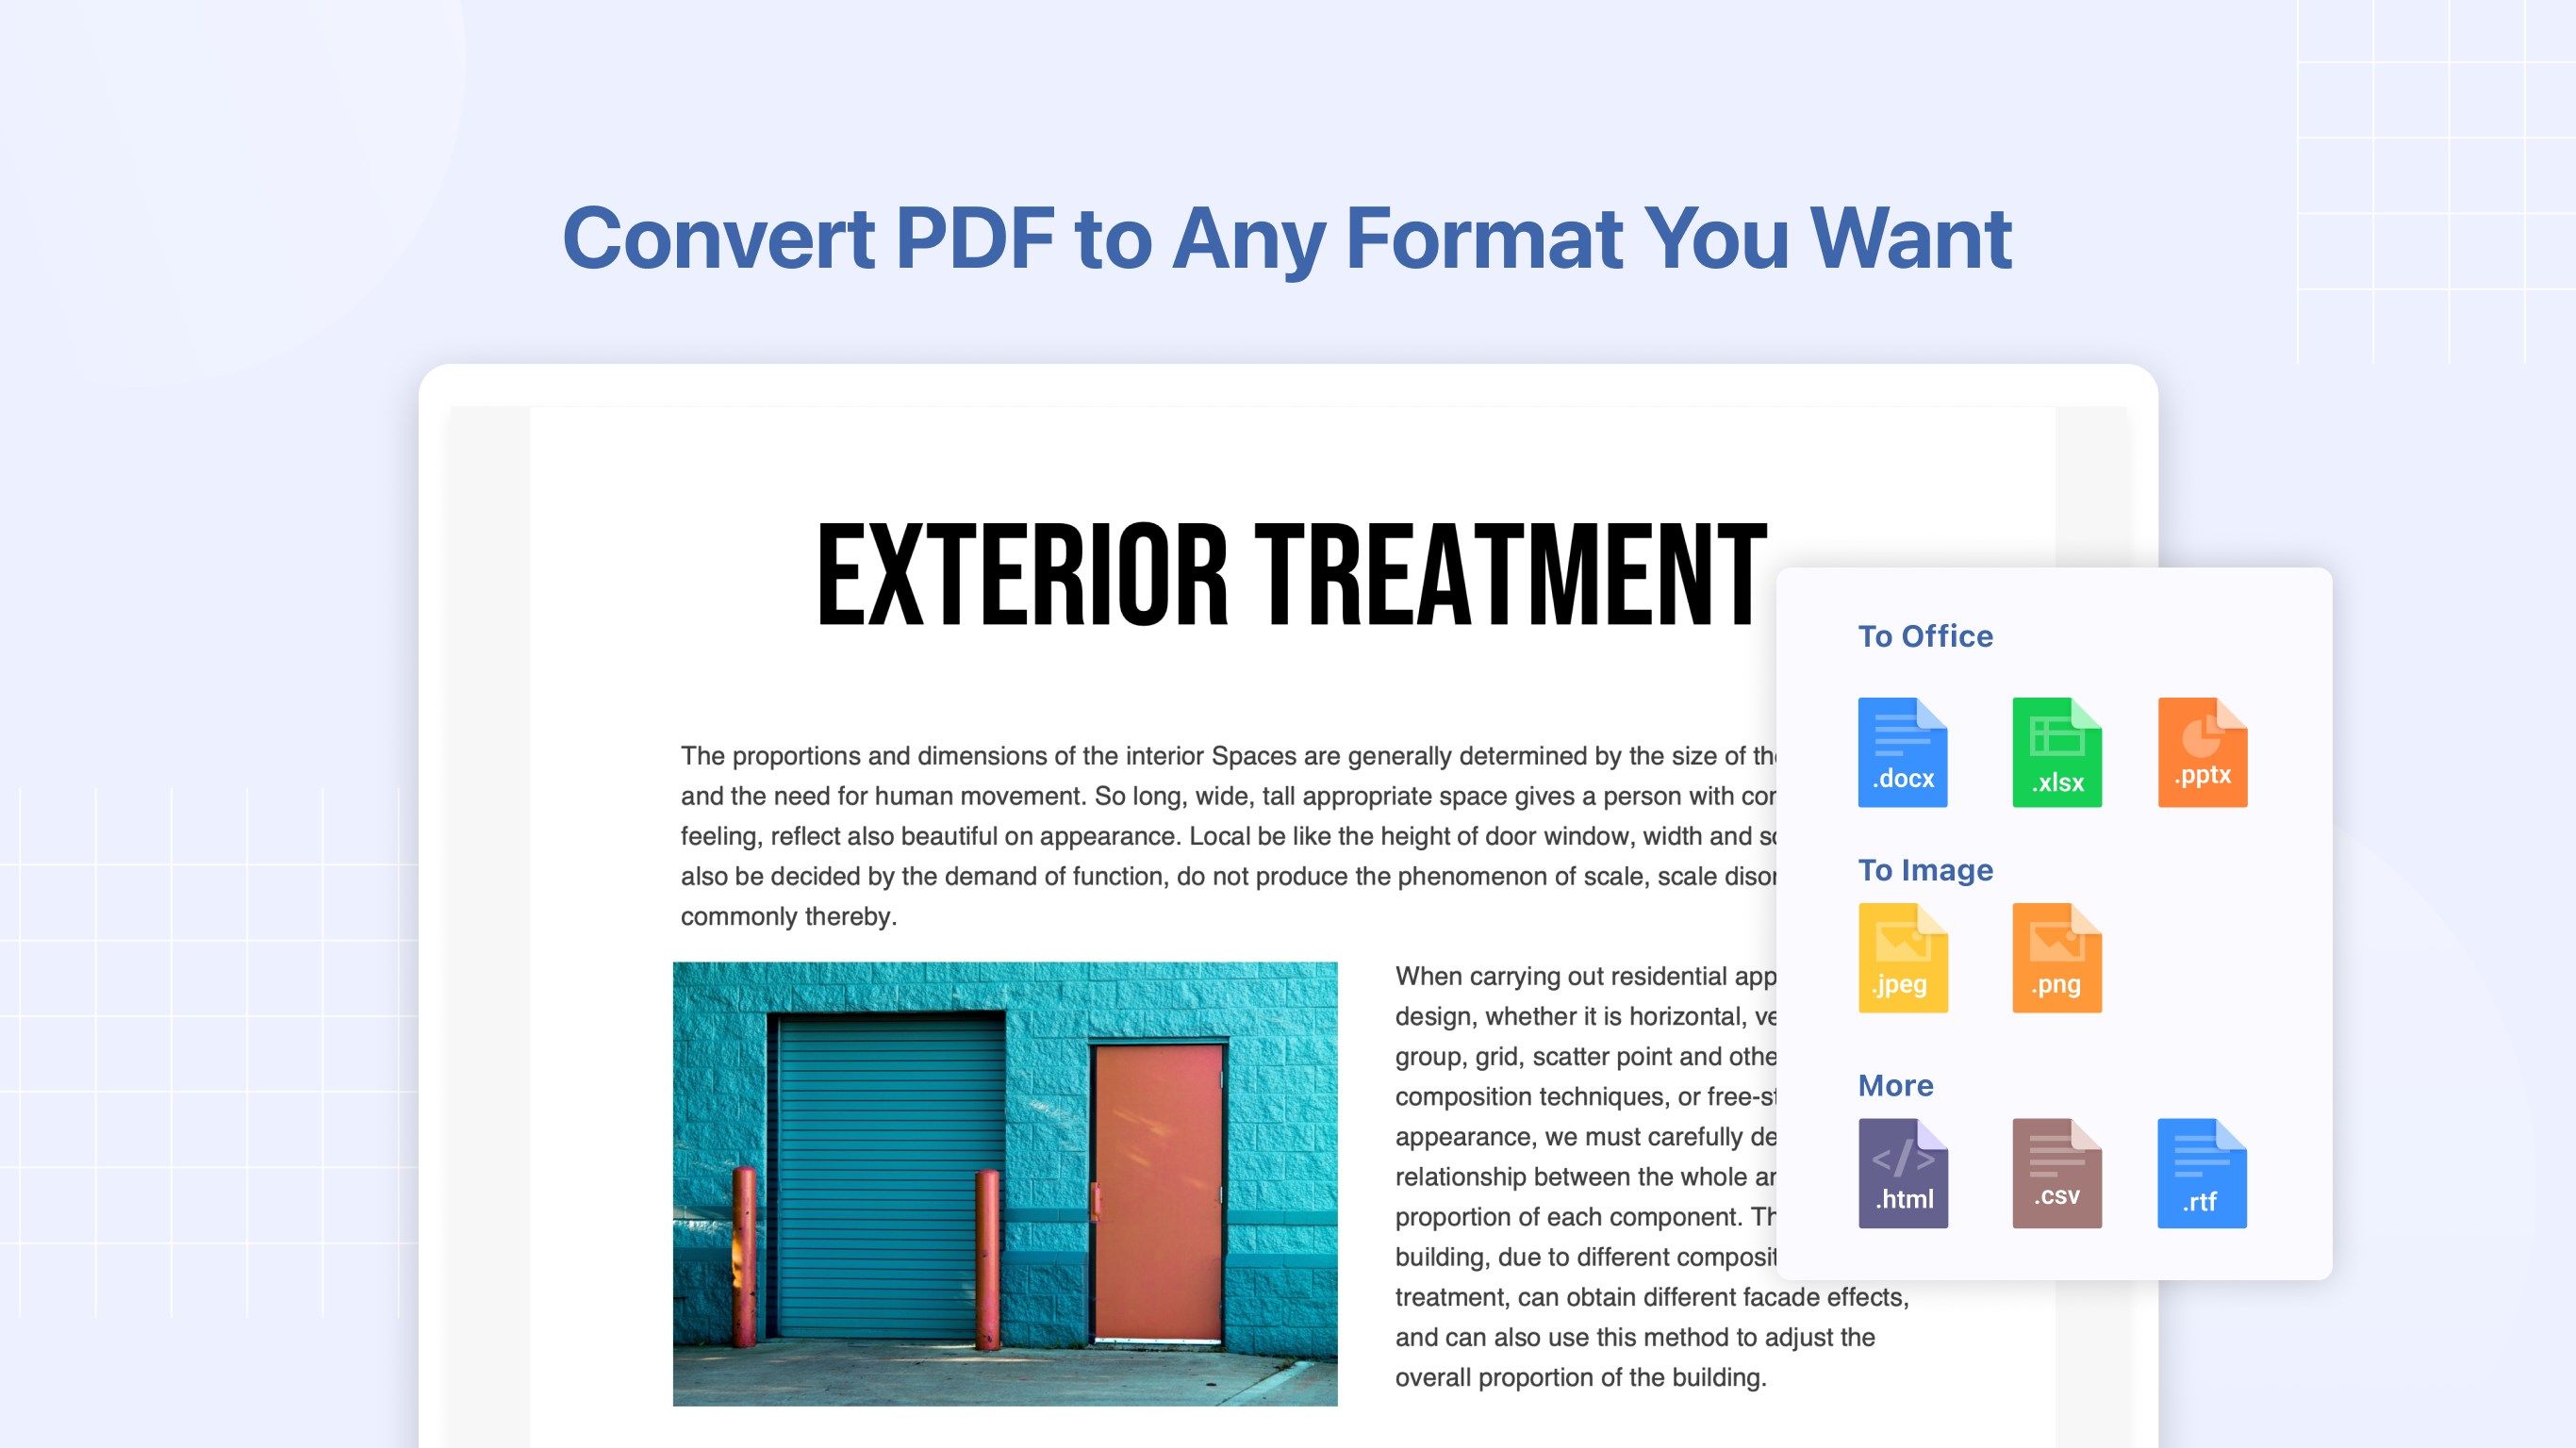 Convert PDF to Any Format You Want